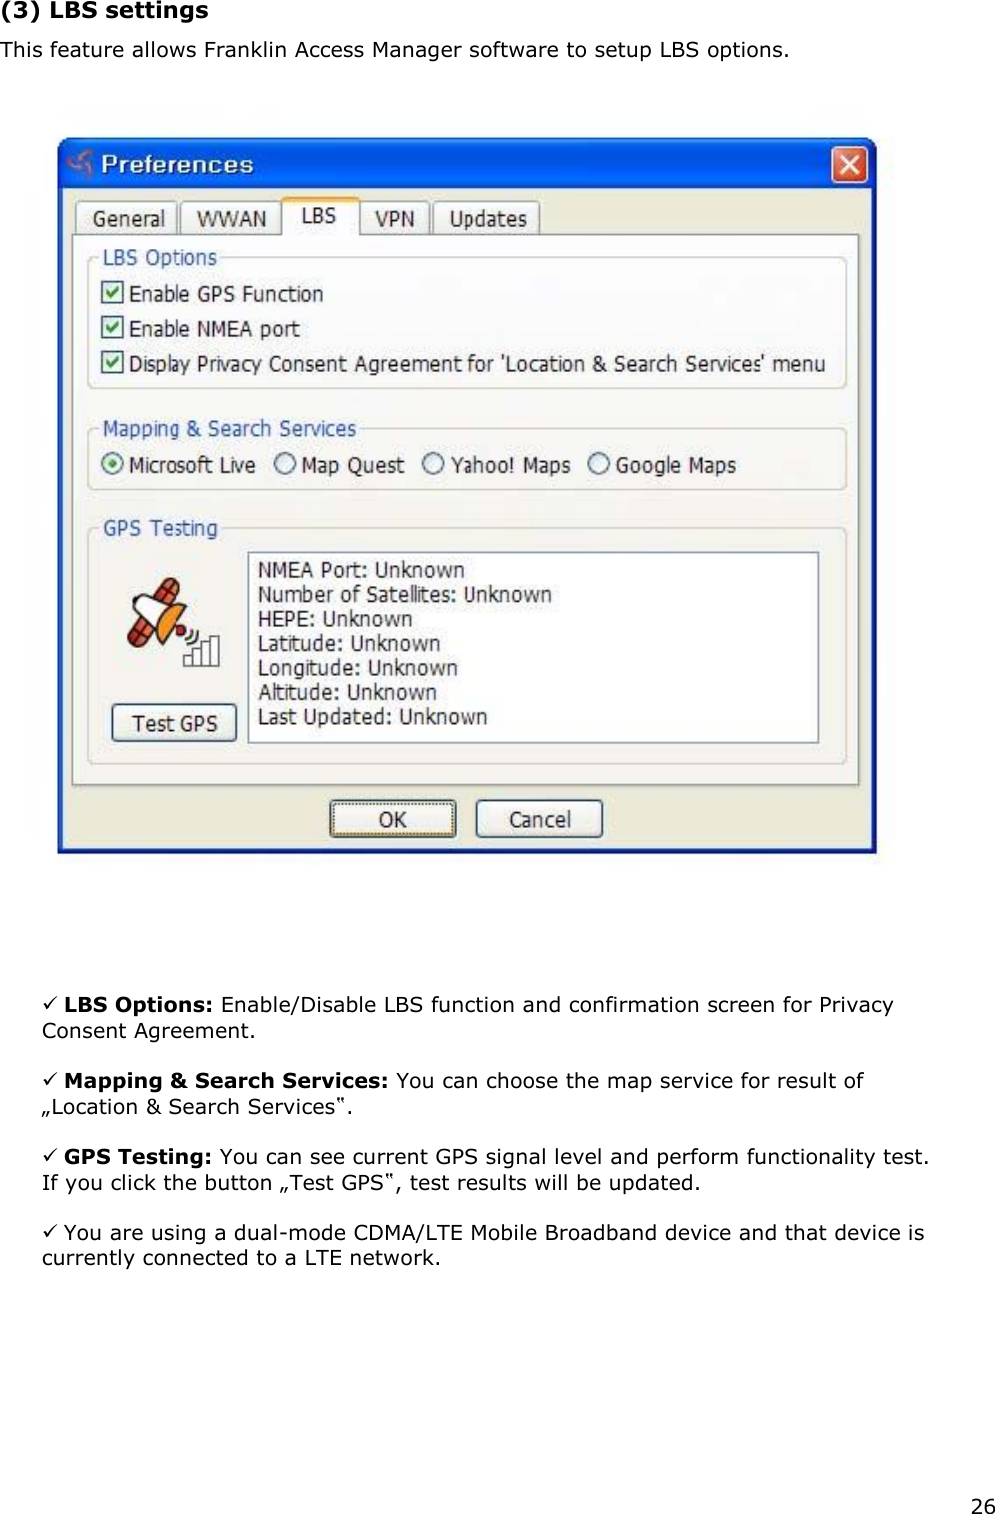 26   (3) LBS settings   This feature allows Franklin Access Manager software to setup LBS options.              LBS Options: Enable/Disable LBS function and confirmation screen for Privacy Consent Agreement.    Mapping &amp; Search Services: You can choose the map service for result of „Location &amp; Search Services‟.    GPS Testing: You can see current GPS signal level and perform functionality test. If you click the button „Test GPS‟, test results will be updated.    You are using a dual-mode CDMA/LTE Mobile Broadband device and that device is currently connected to a LTE network.            